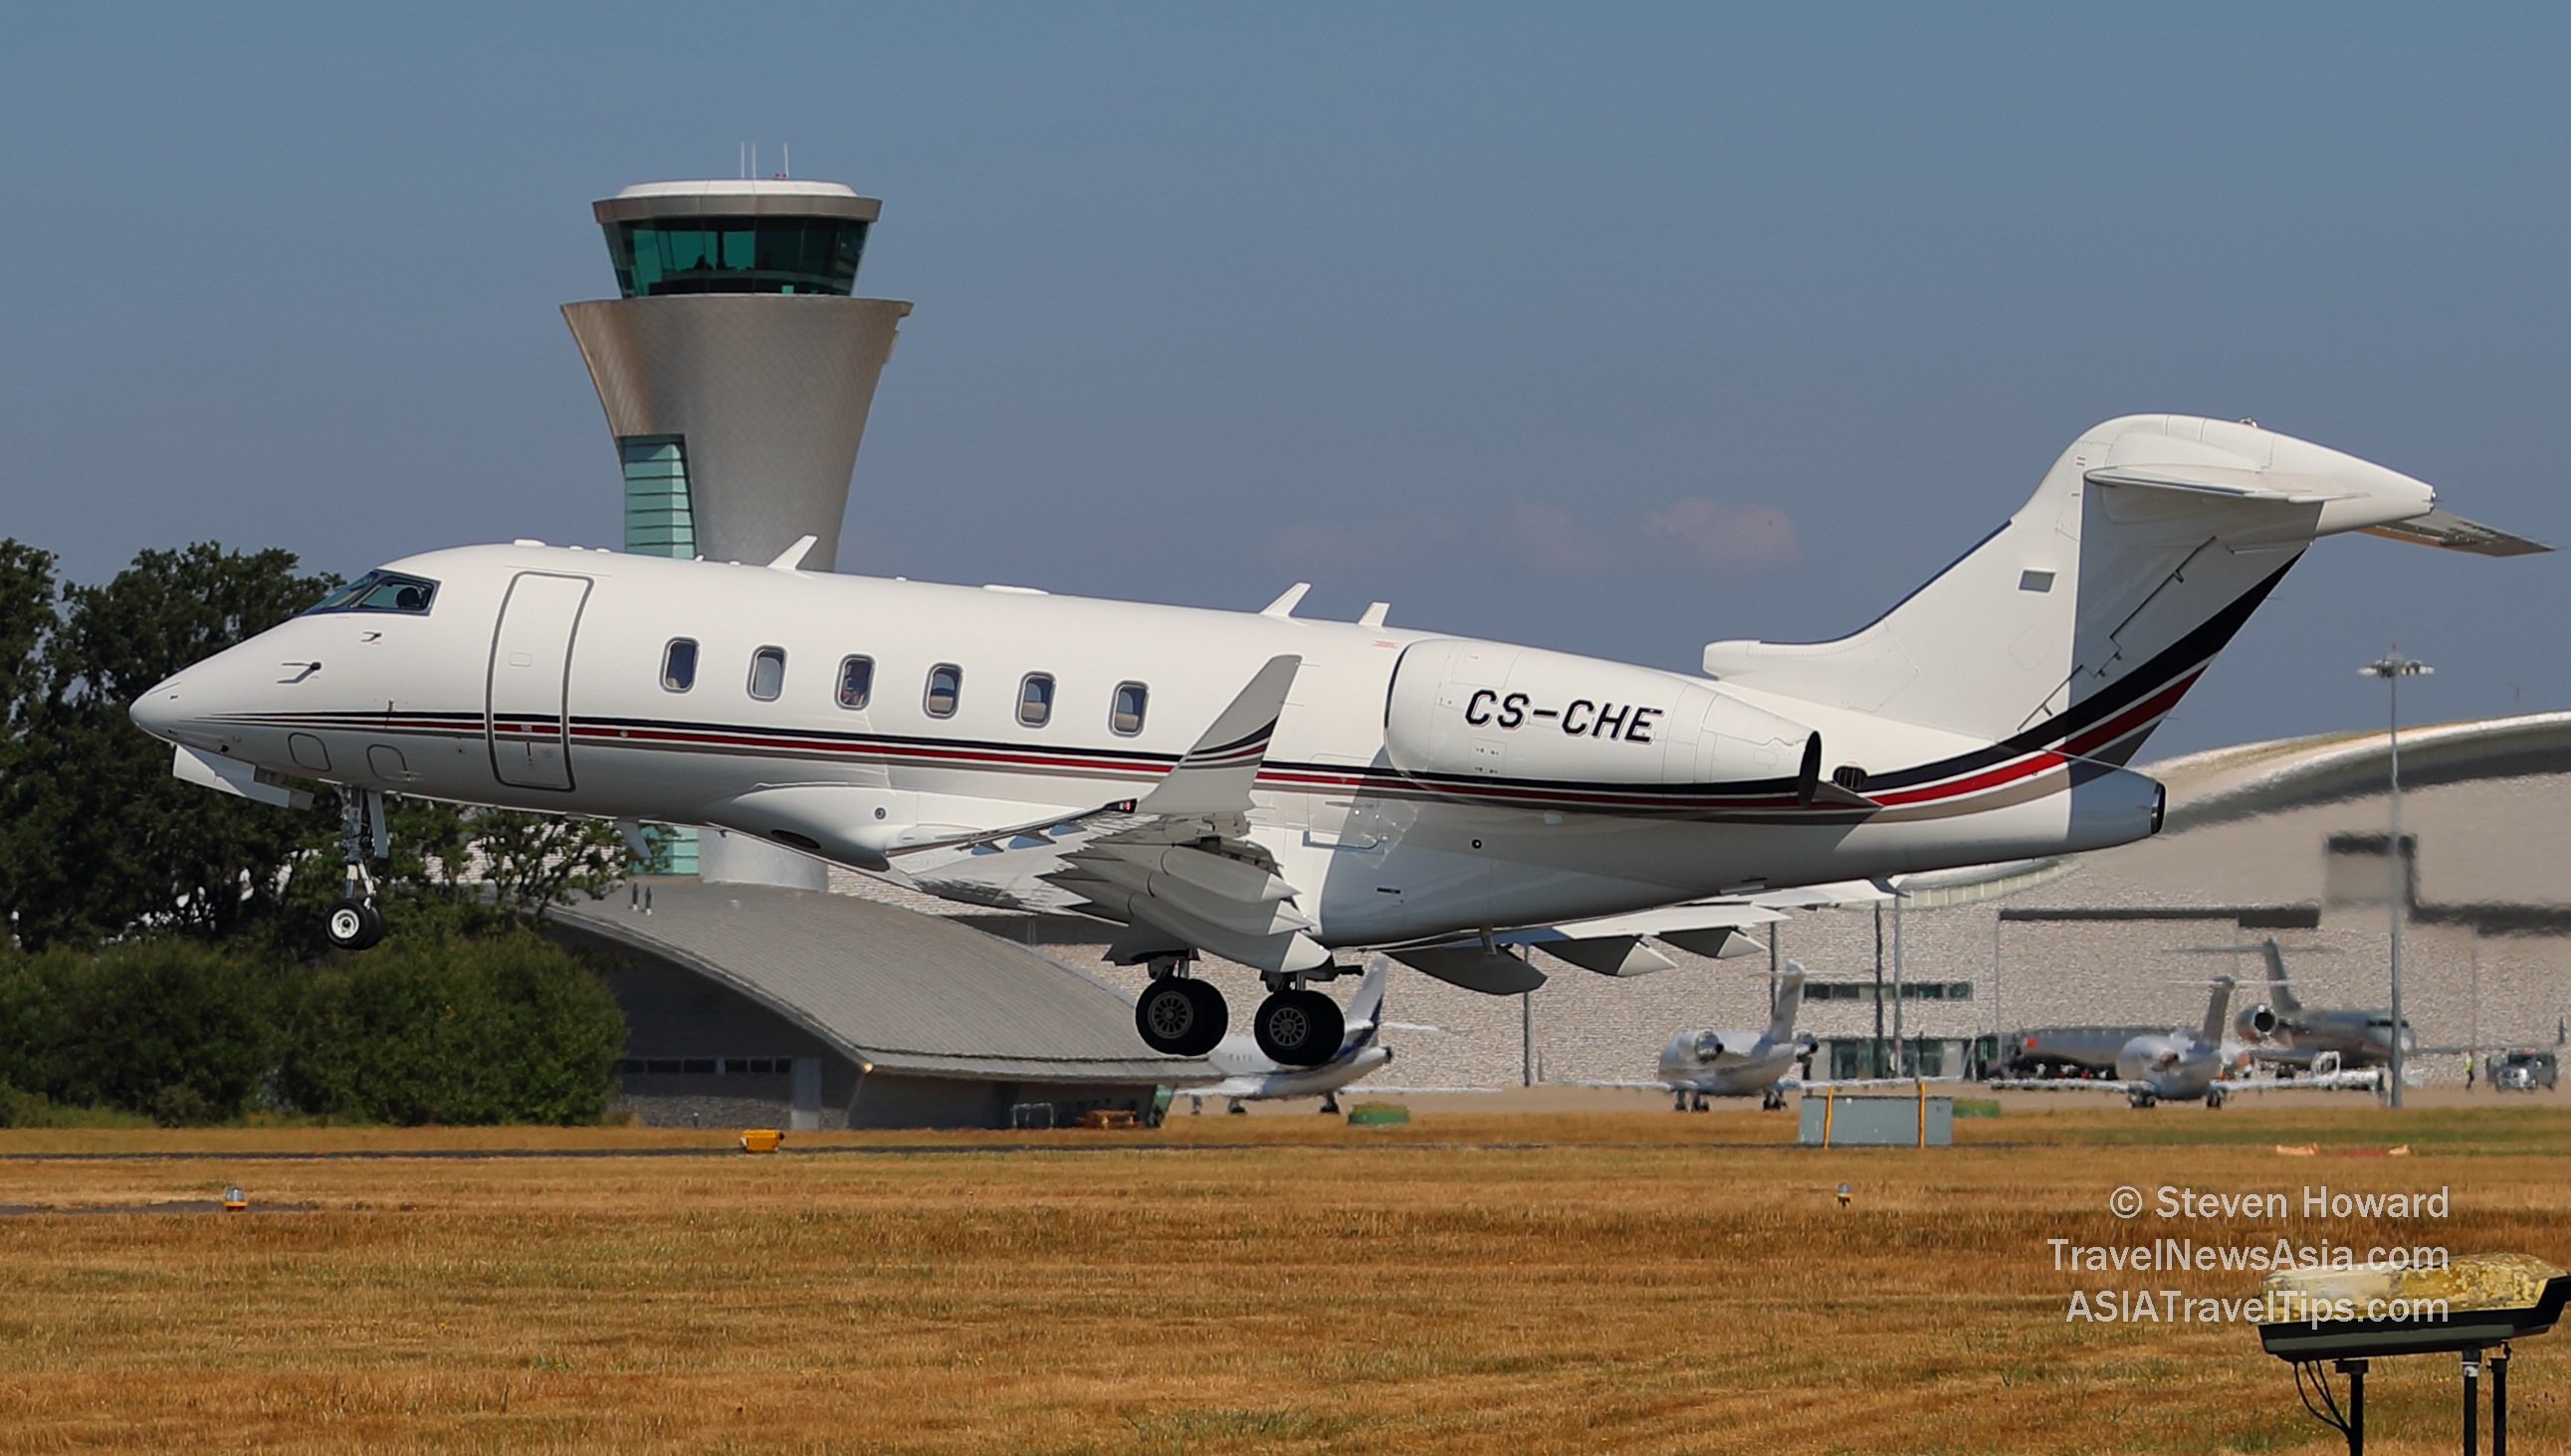 Bombardier Challenger 350 (not the jet delivered). Picture by Steven Howard of TravelNewsAsia.com Click to enlarge.